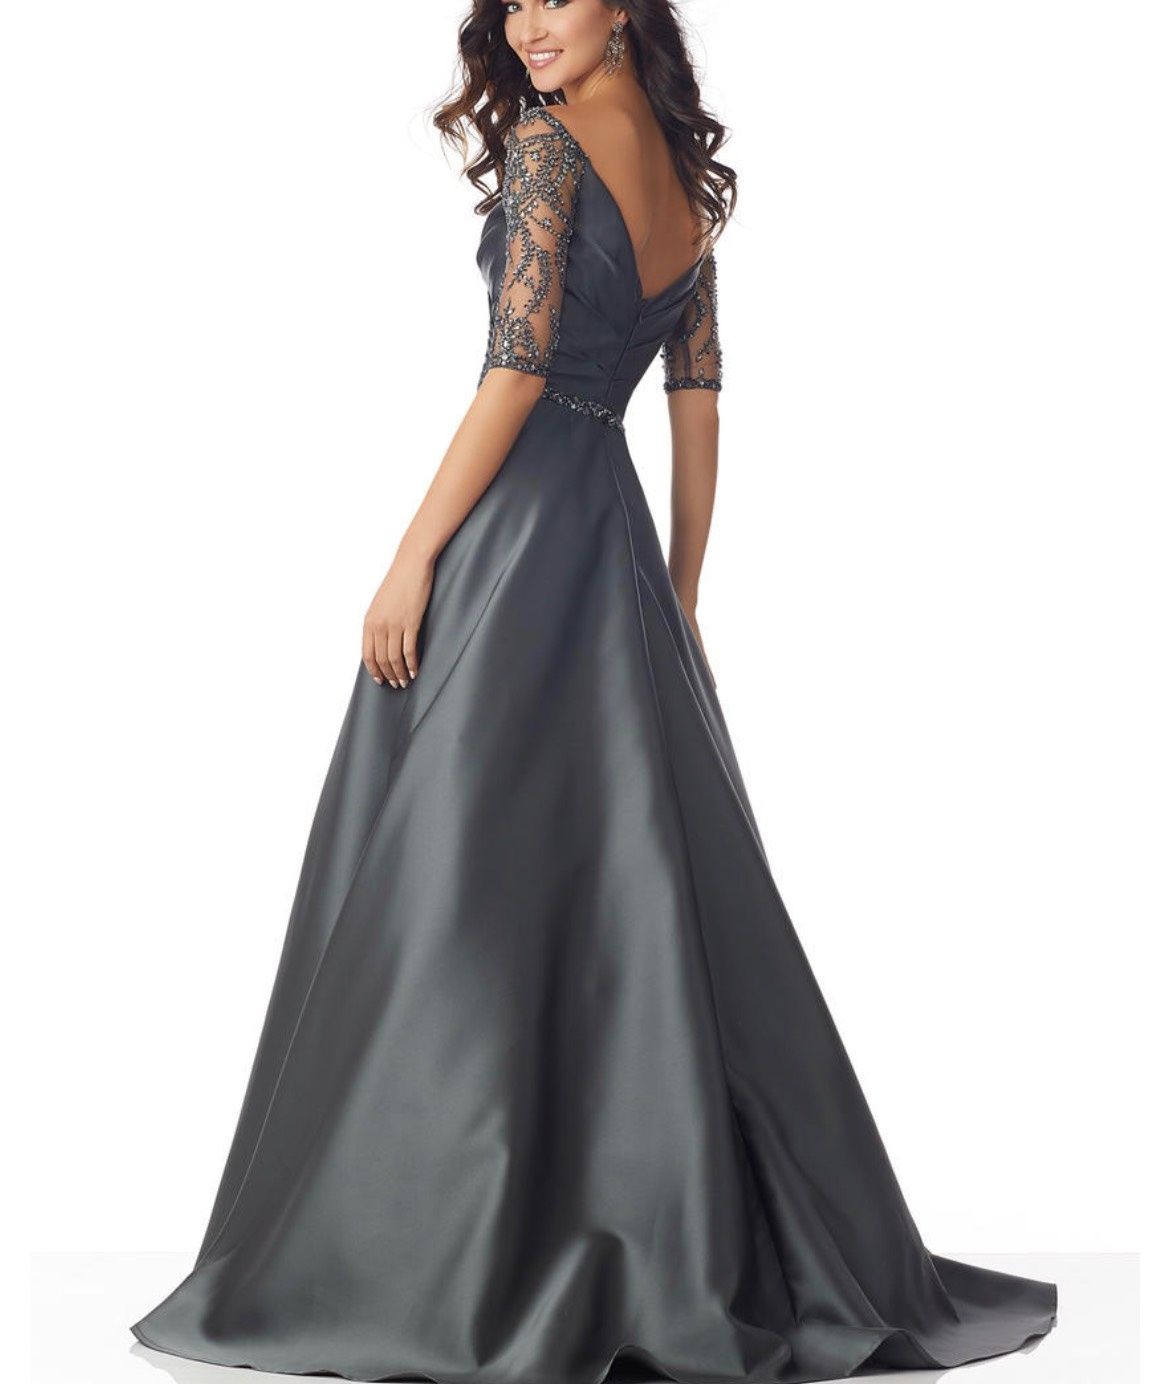 Unique Dress Club Size 4 Prom Satin Silver A-line Dress on Queenly